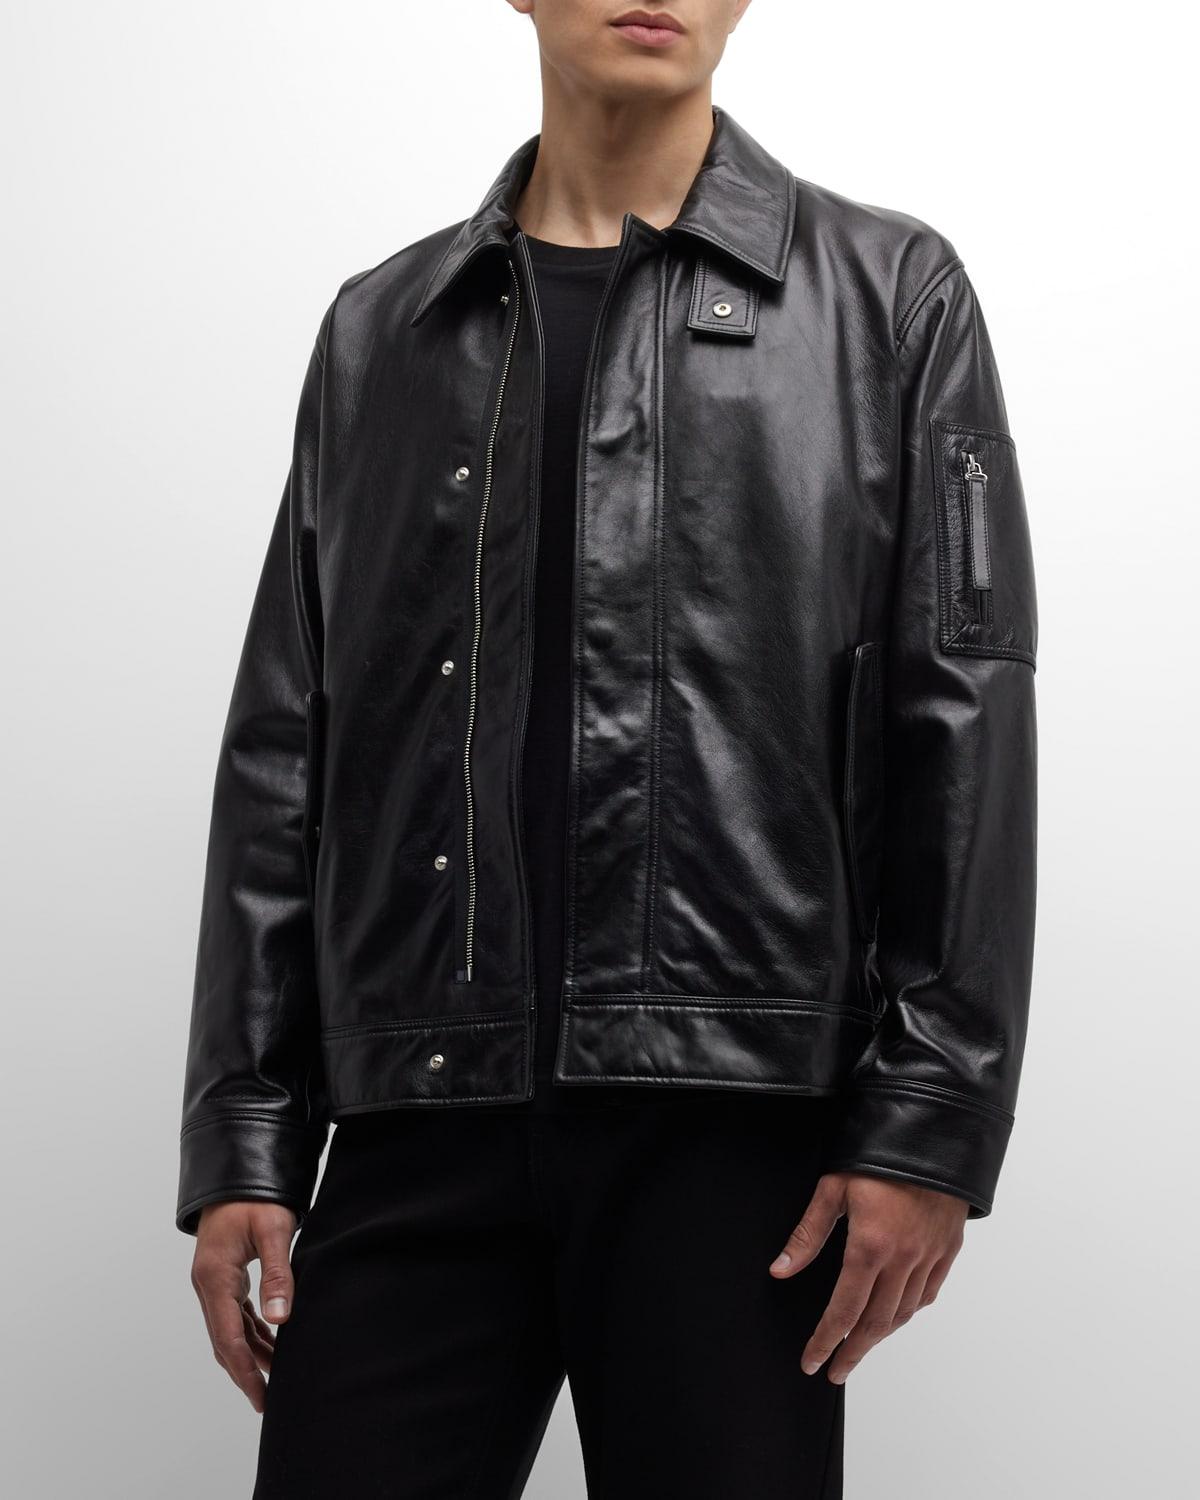 Helmut Lang Classic Leather Jacket in Black for Men | Lyst